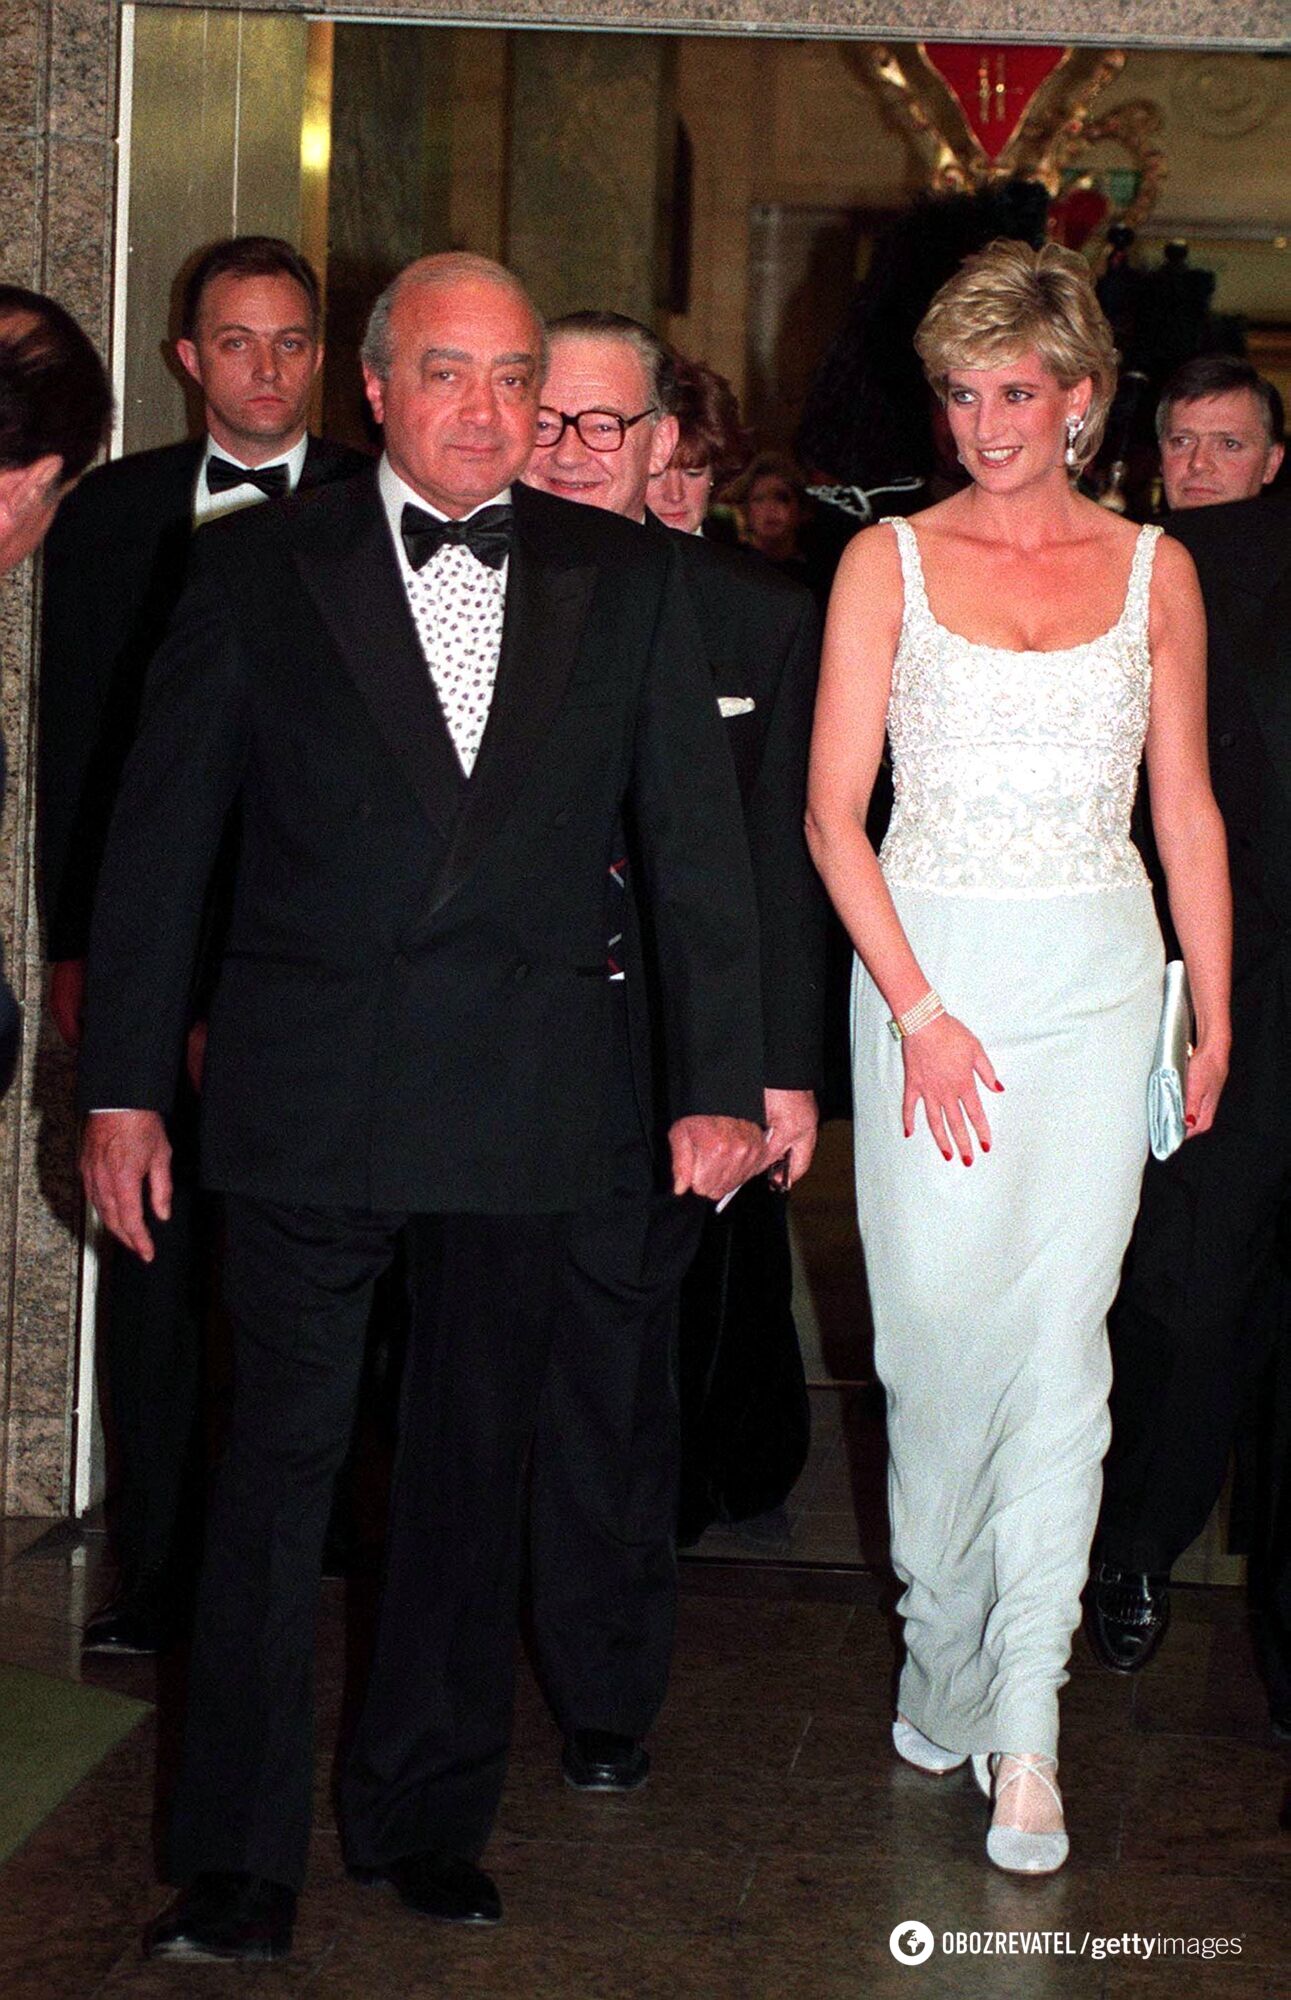 Mohamed Al Fayed, the father of Princess Diana's lover who died with her in a traffic accident 26 years ago, has died